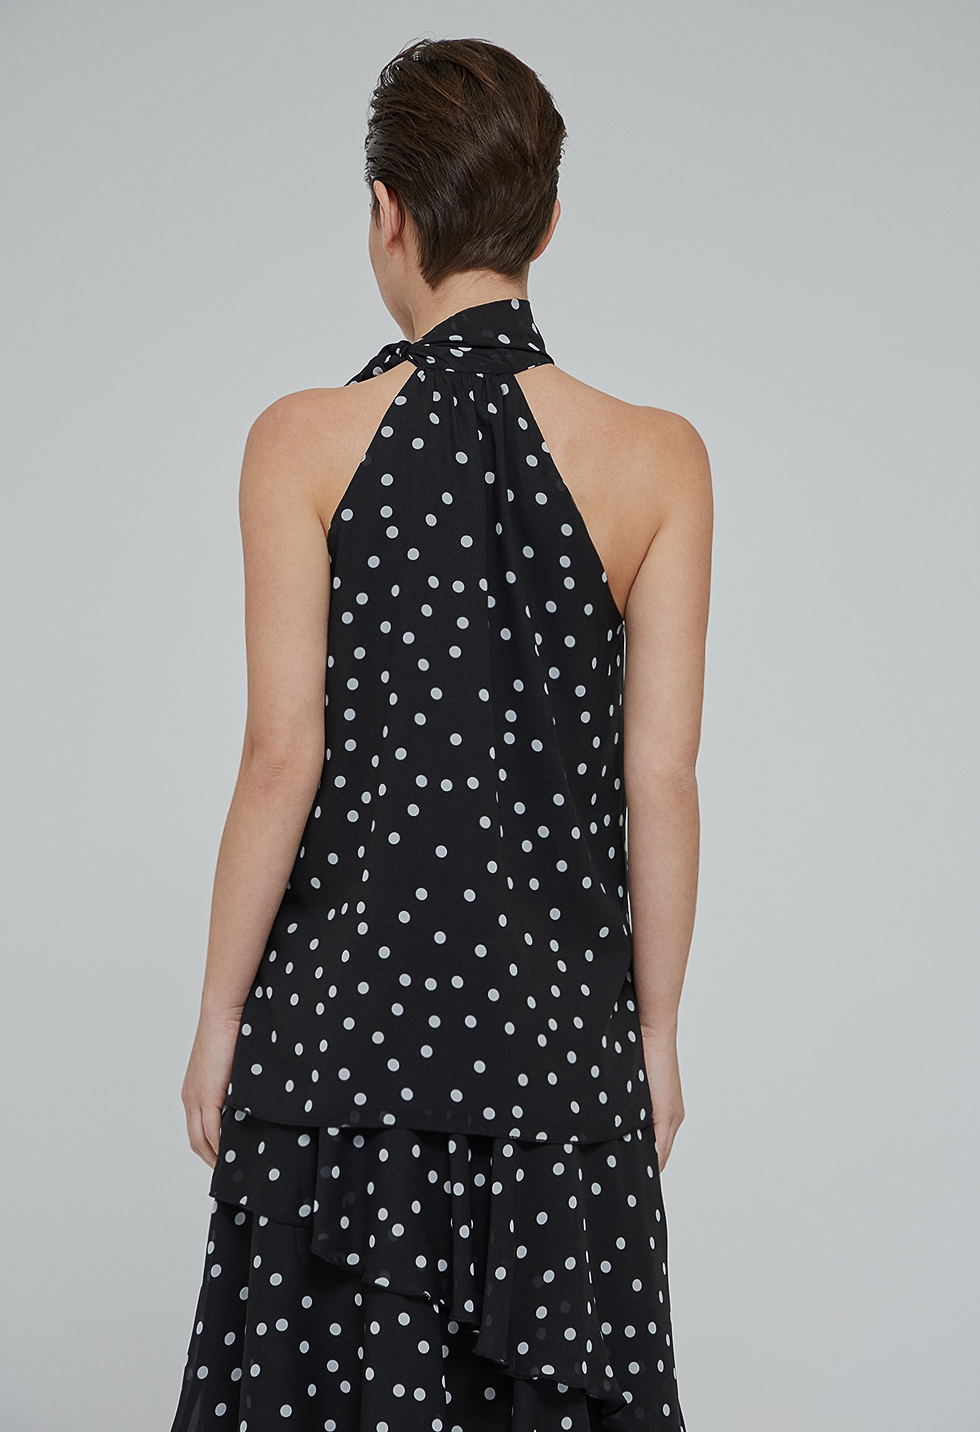 Polka dot blouse with tie-neck.